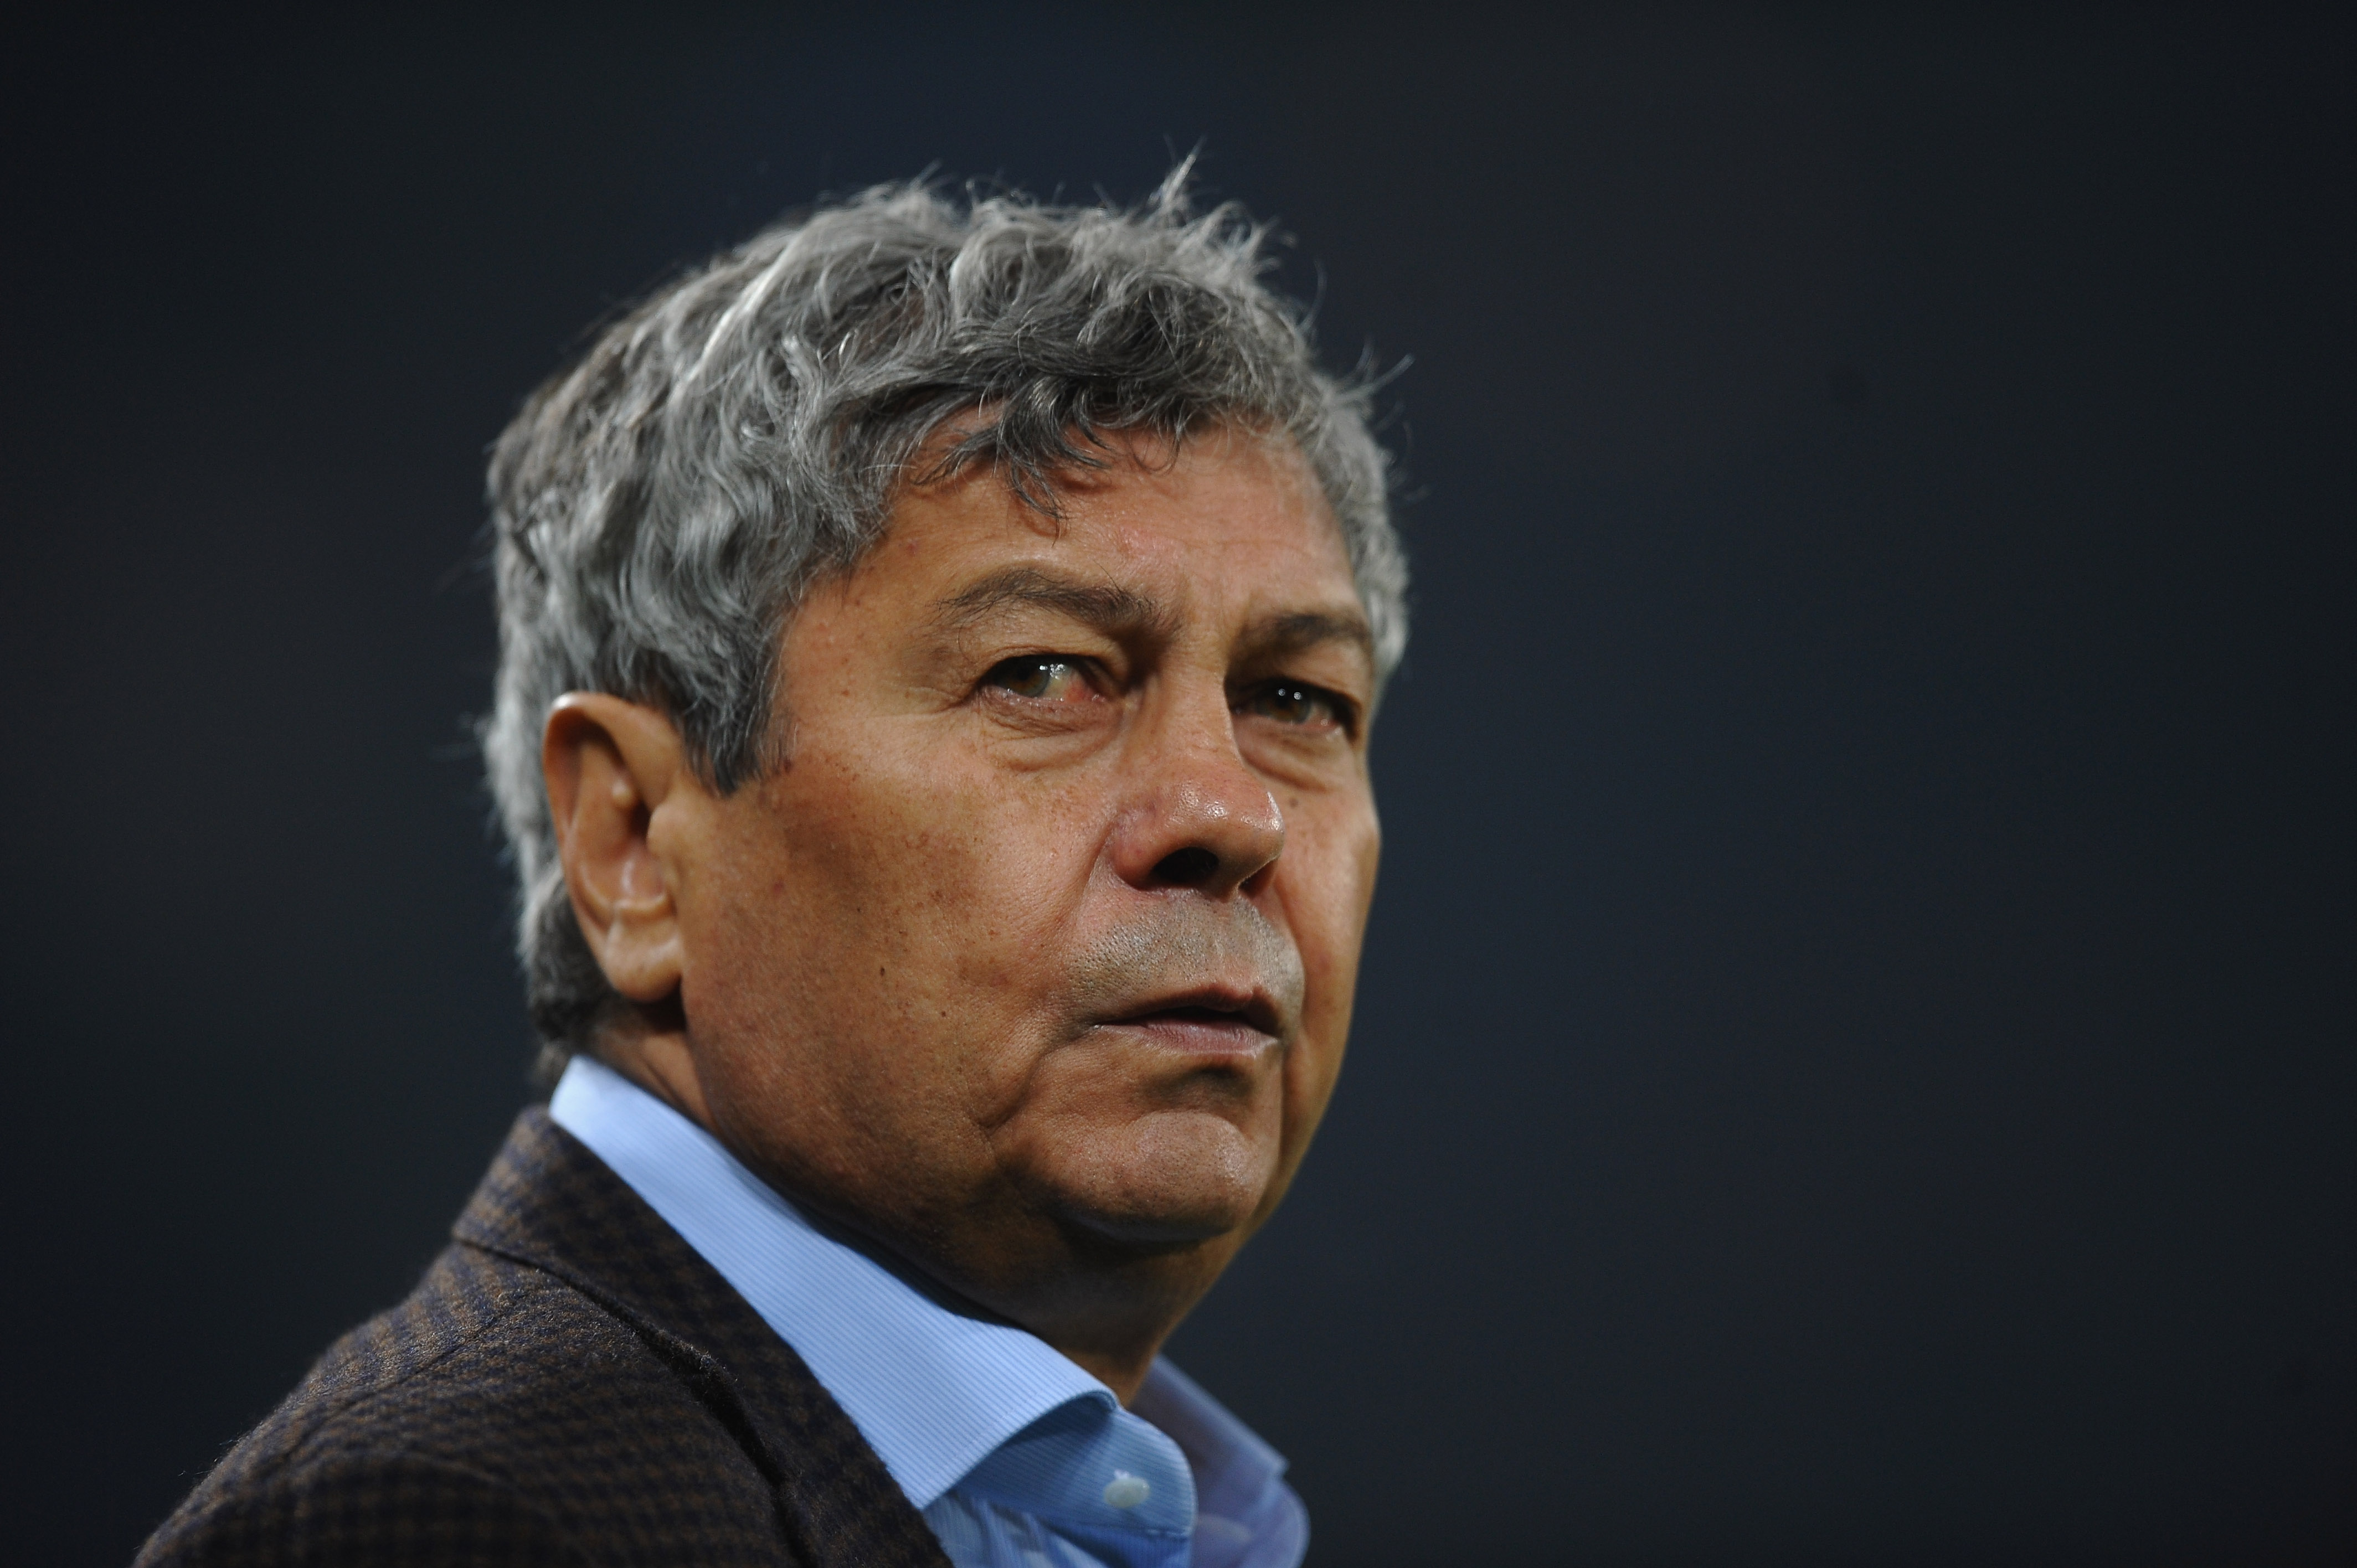 DONETSK, UKRAINE - NOVEMBER 03:  Mircea Lucescu of FC Shakhtar Donetsk looks on during the Champions League Group H match between FC Shakhtar Donetsk and Arsenal at the Donbass Arena on November 3, 2010 in Donetsk, Ukraine.  (Photo by Laurence Griffiths/G